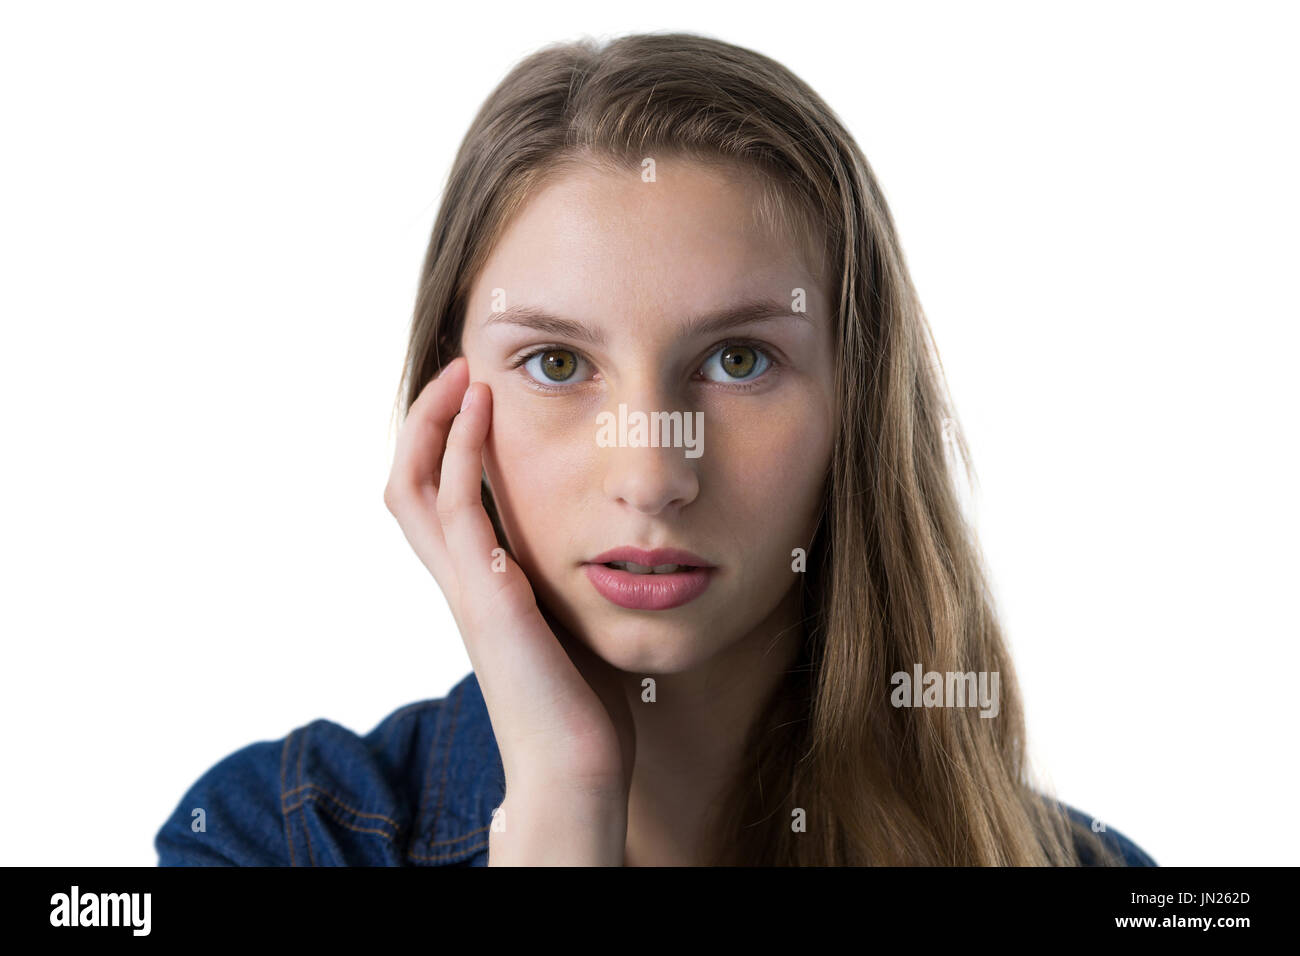 Portrait of confused teenage girl with hand on face Stock Photo